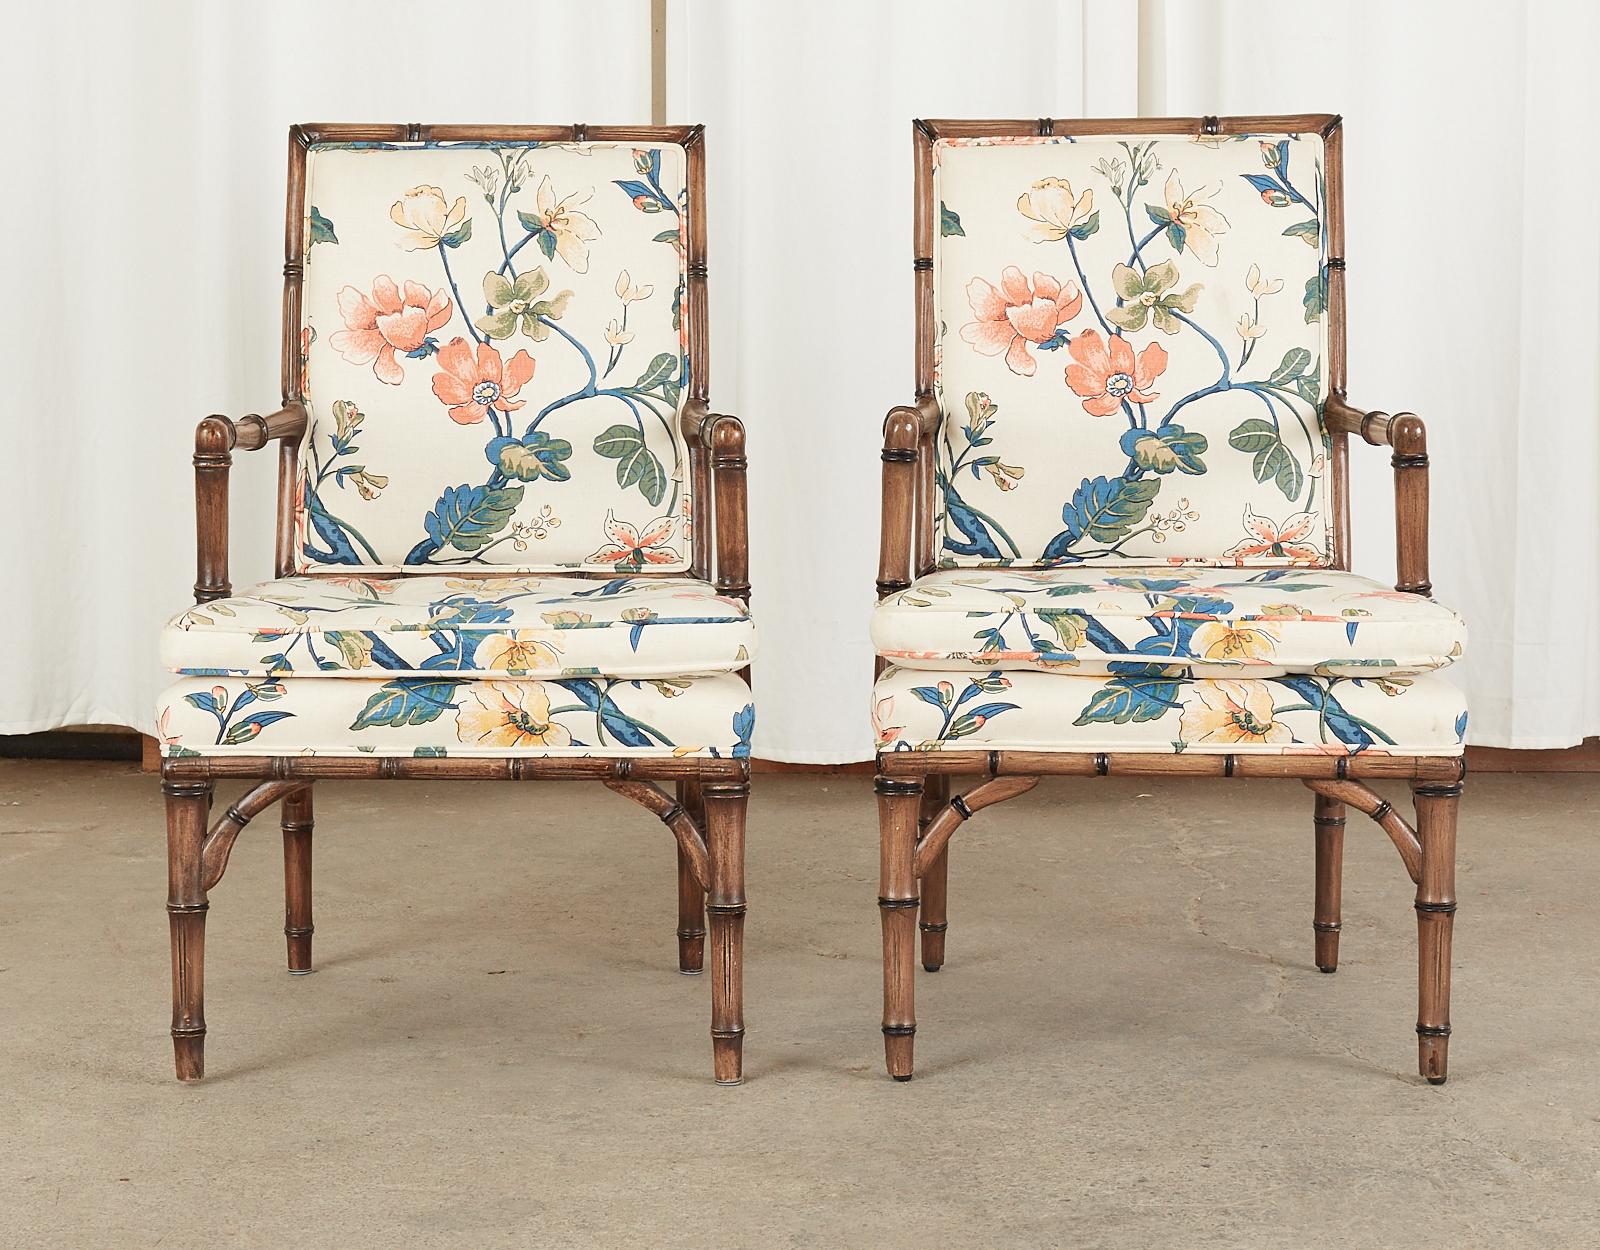 Mid-Century Modern set of four dining armchairs from the estate of Bob and Dolores Hope on Southridge Drive in Palm Springs. The chairs feature Hollywood regency style carved faux bamboo frames that were re-upholstered in 1996 to the floral chintz